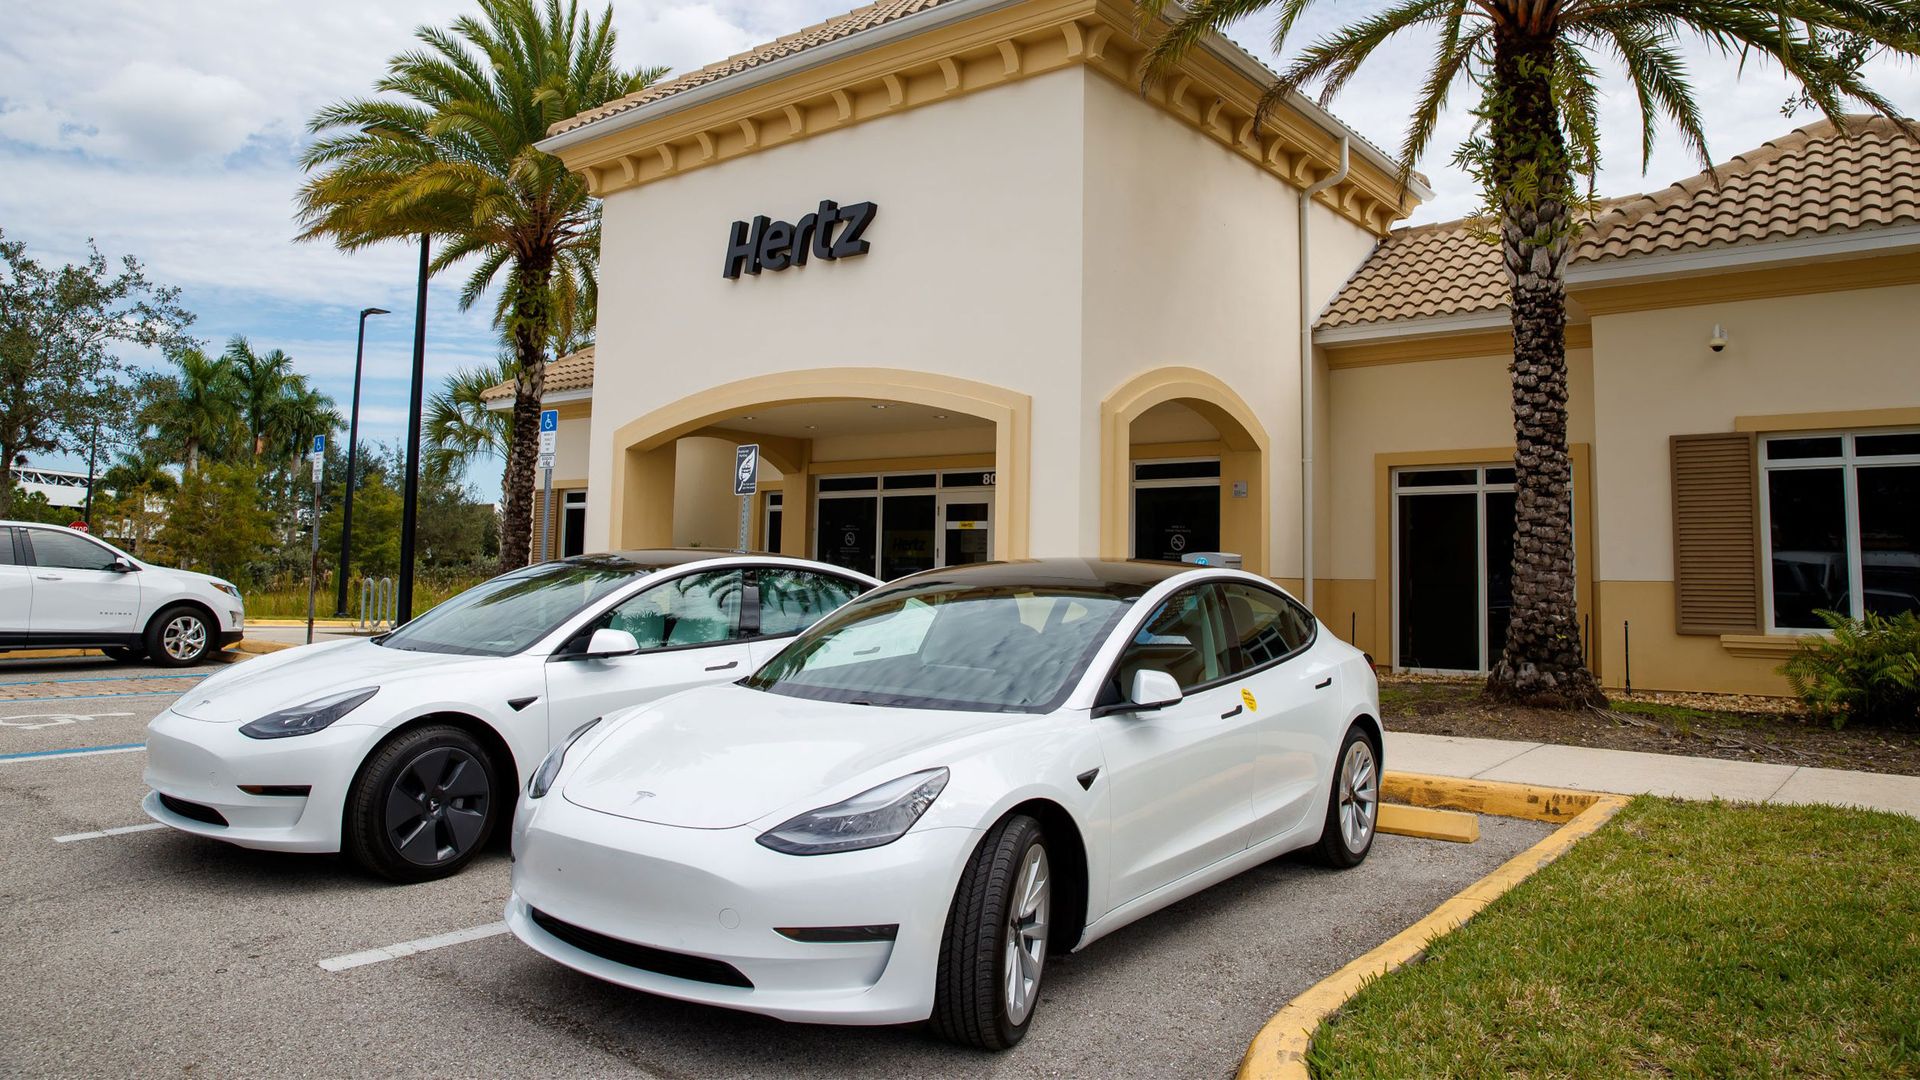 Image of 2 white Tesla Model 3s parked in front of a Hertz rental location. 